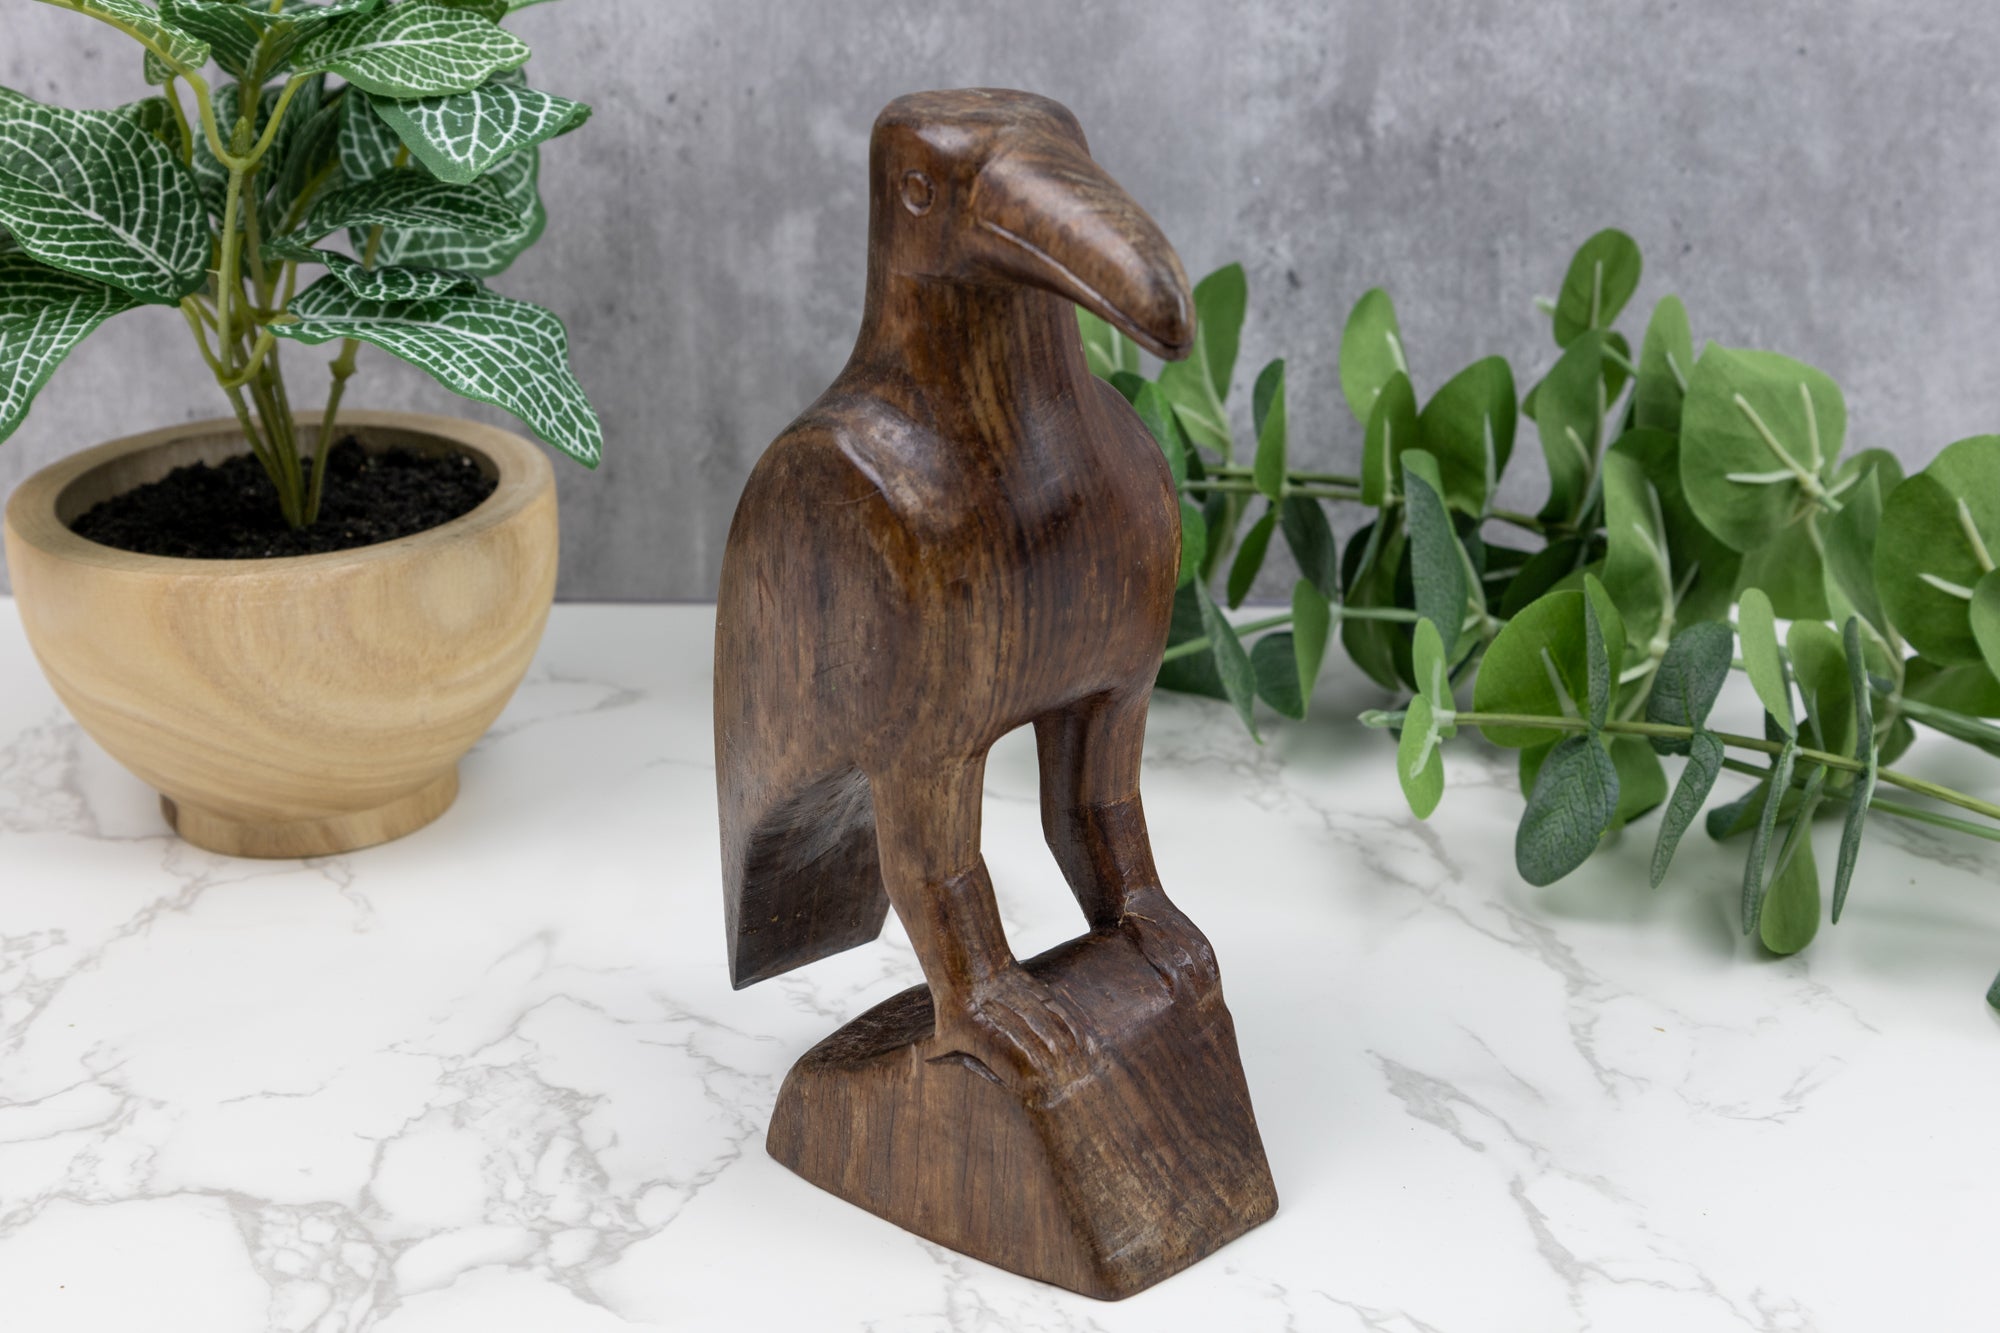 Toucan Figurine, Wood Carving